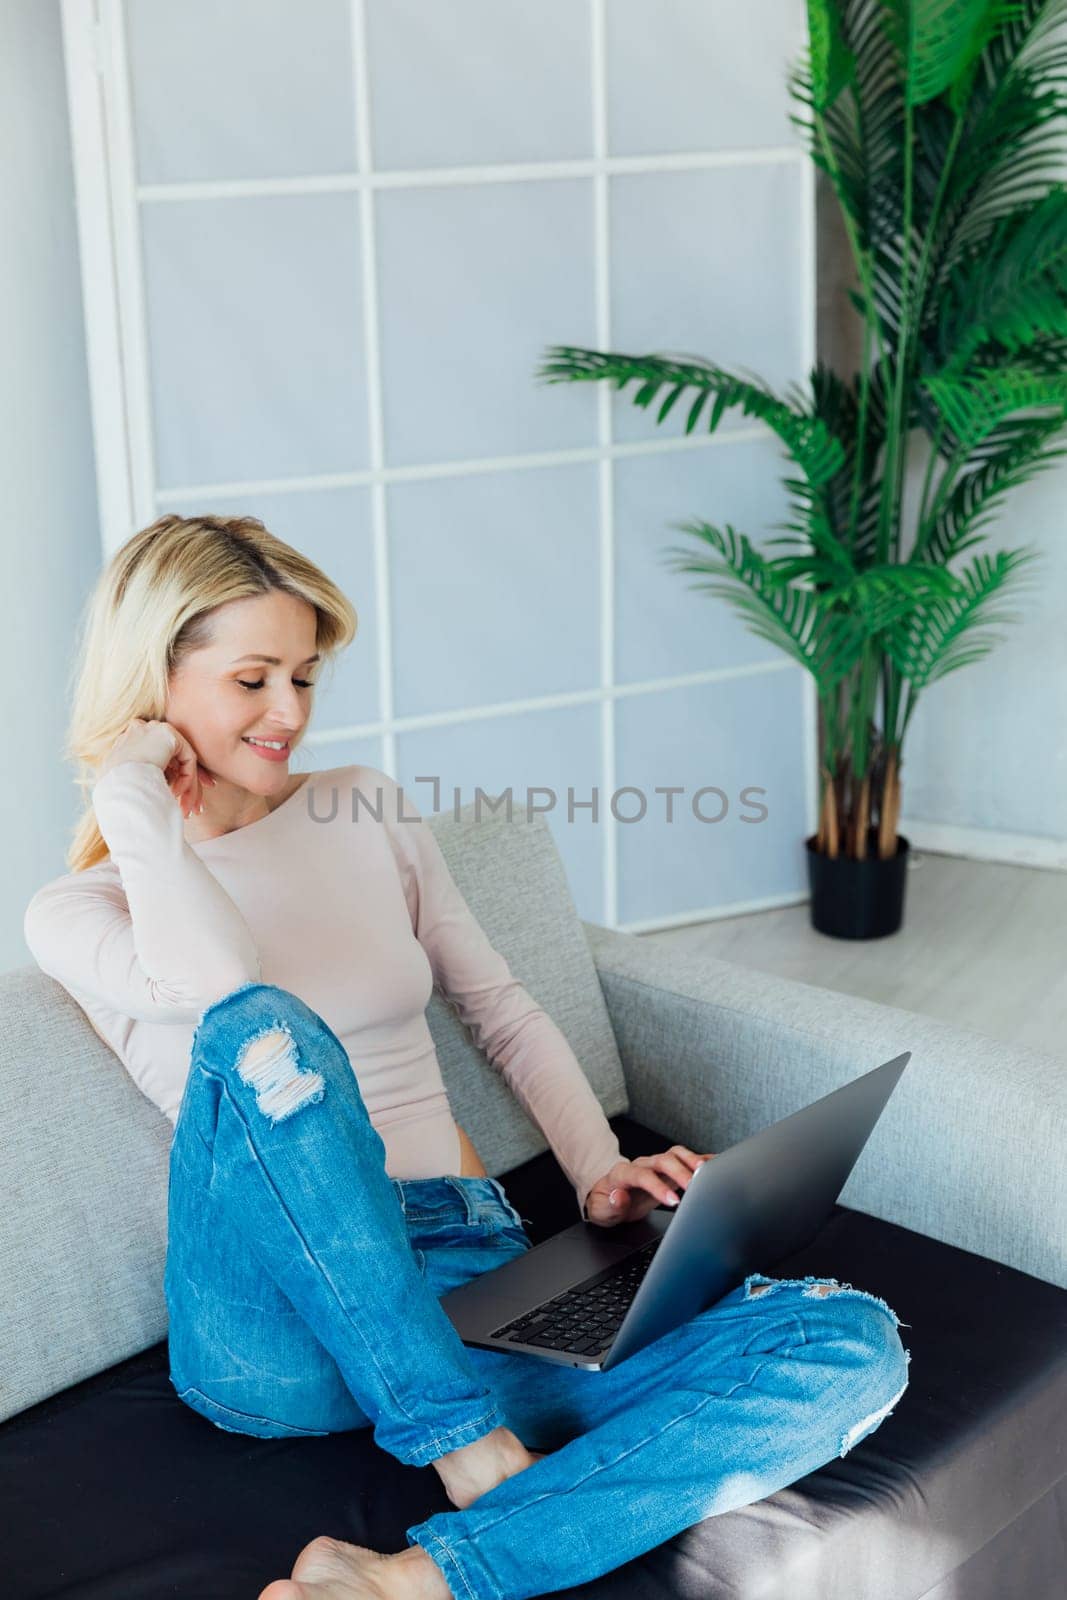 communication remote work woman with laptop computer internet conversation online communication in the room by Simakov